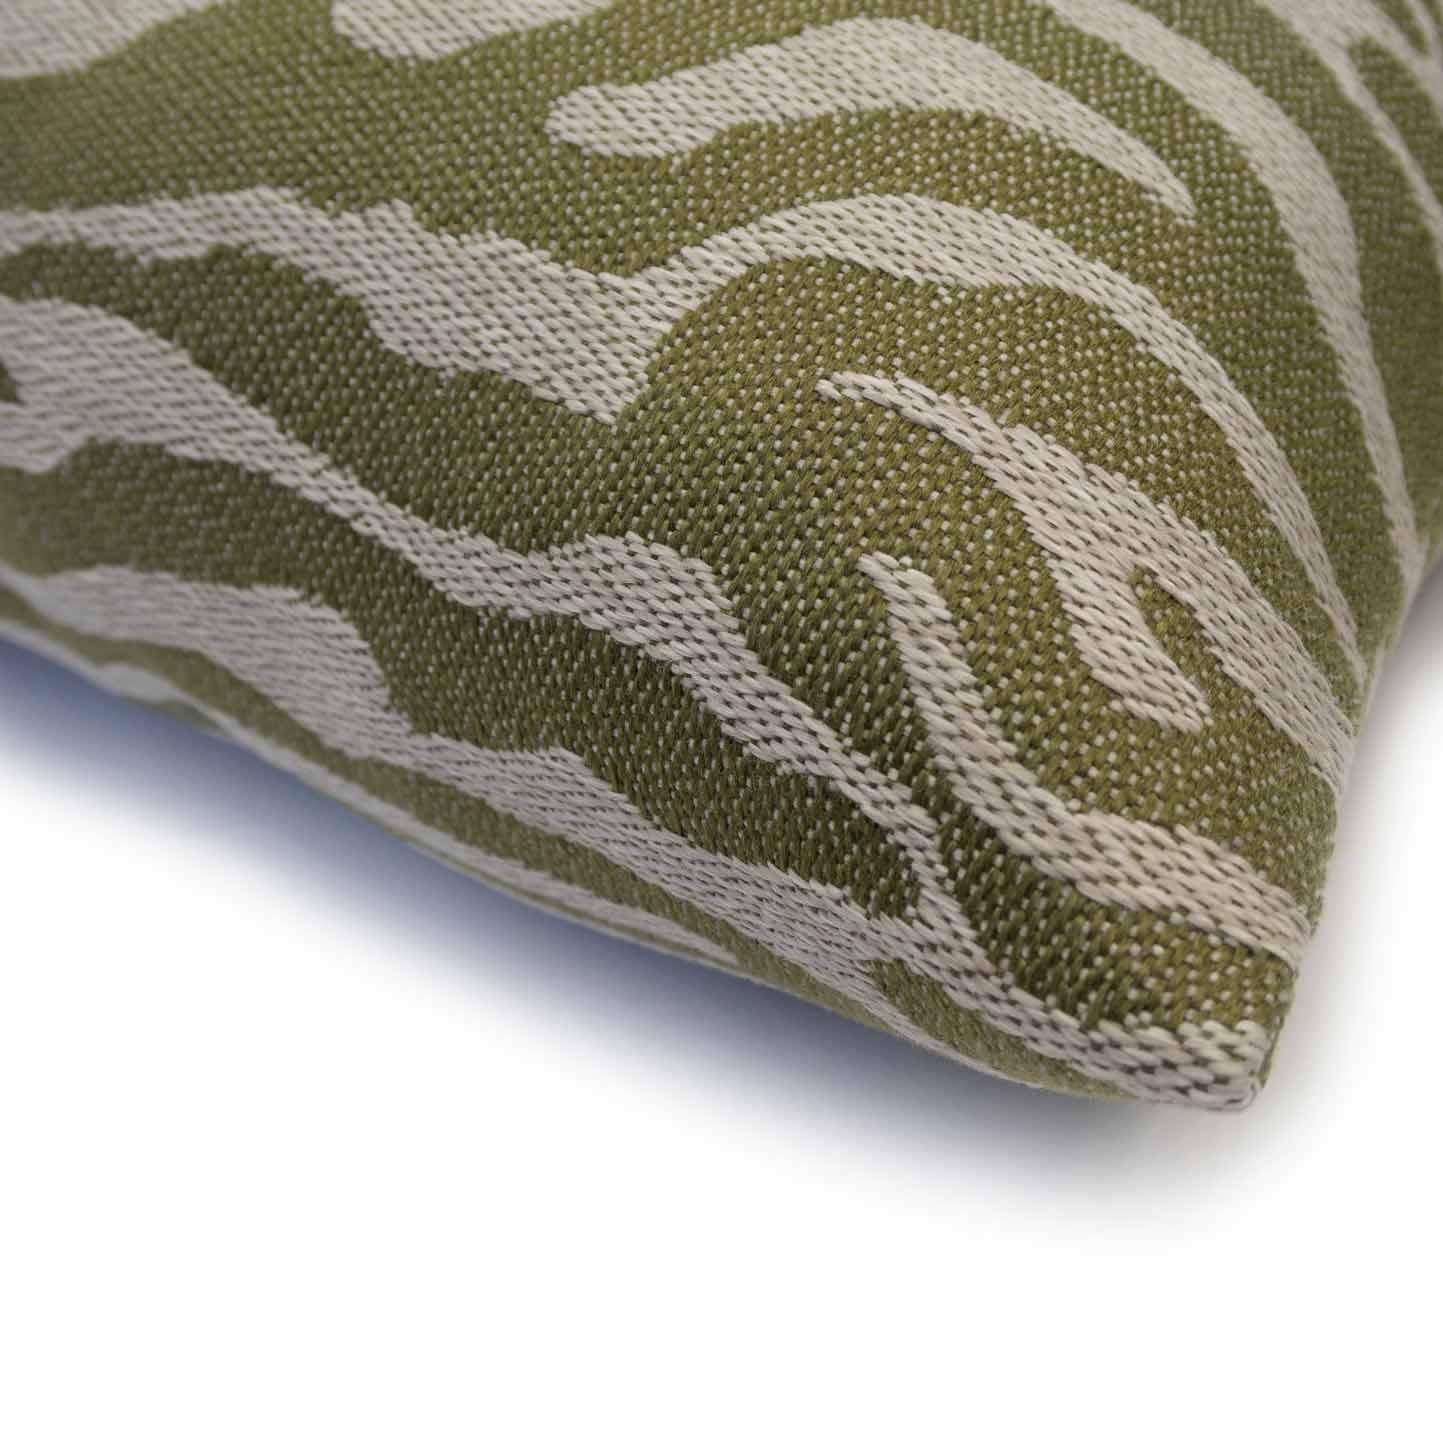 Hand-Crafted Modern Textured Patterned Throw Pillow Green 